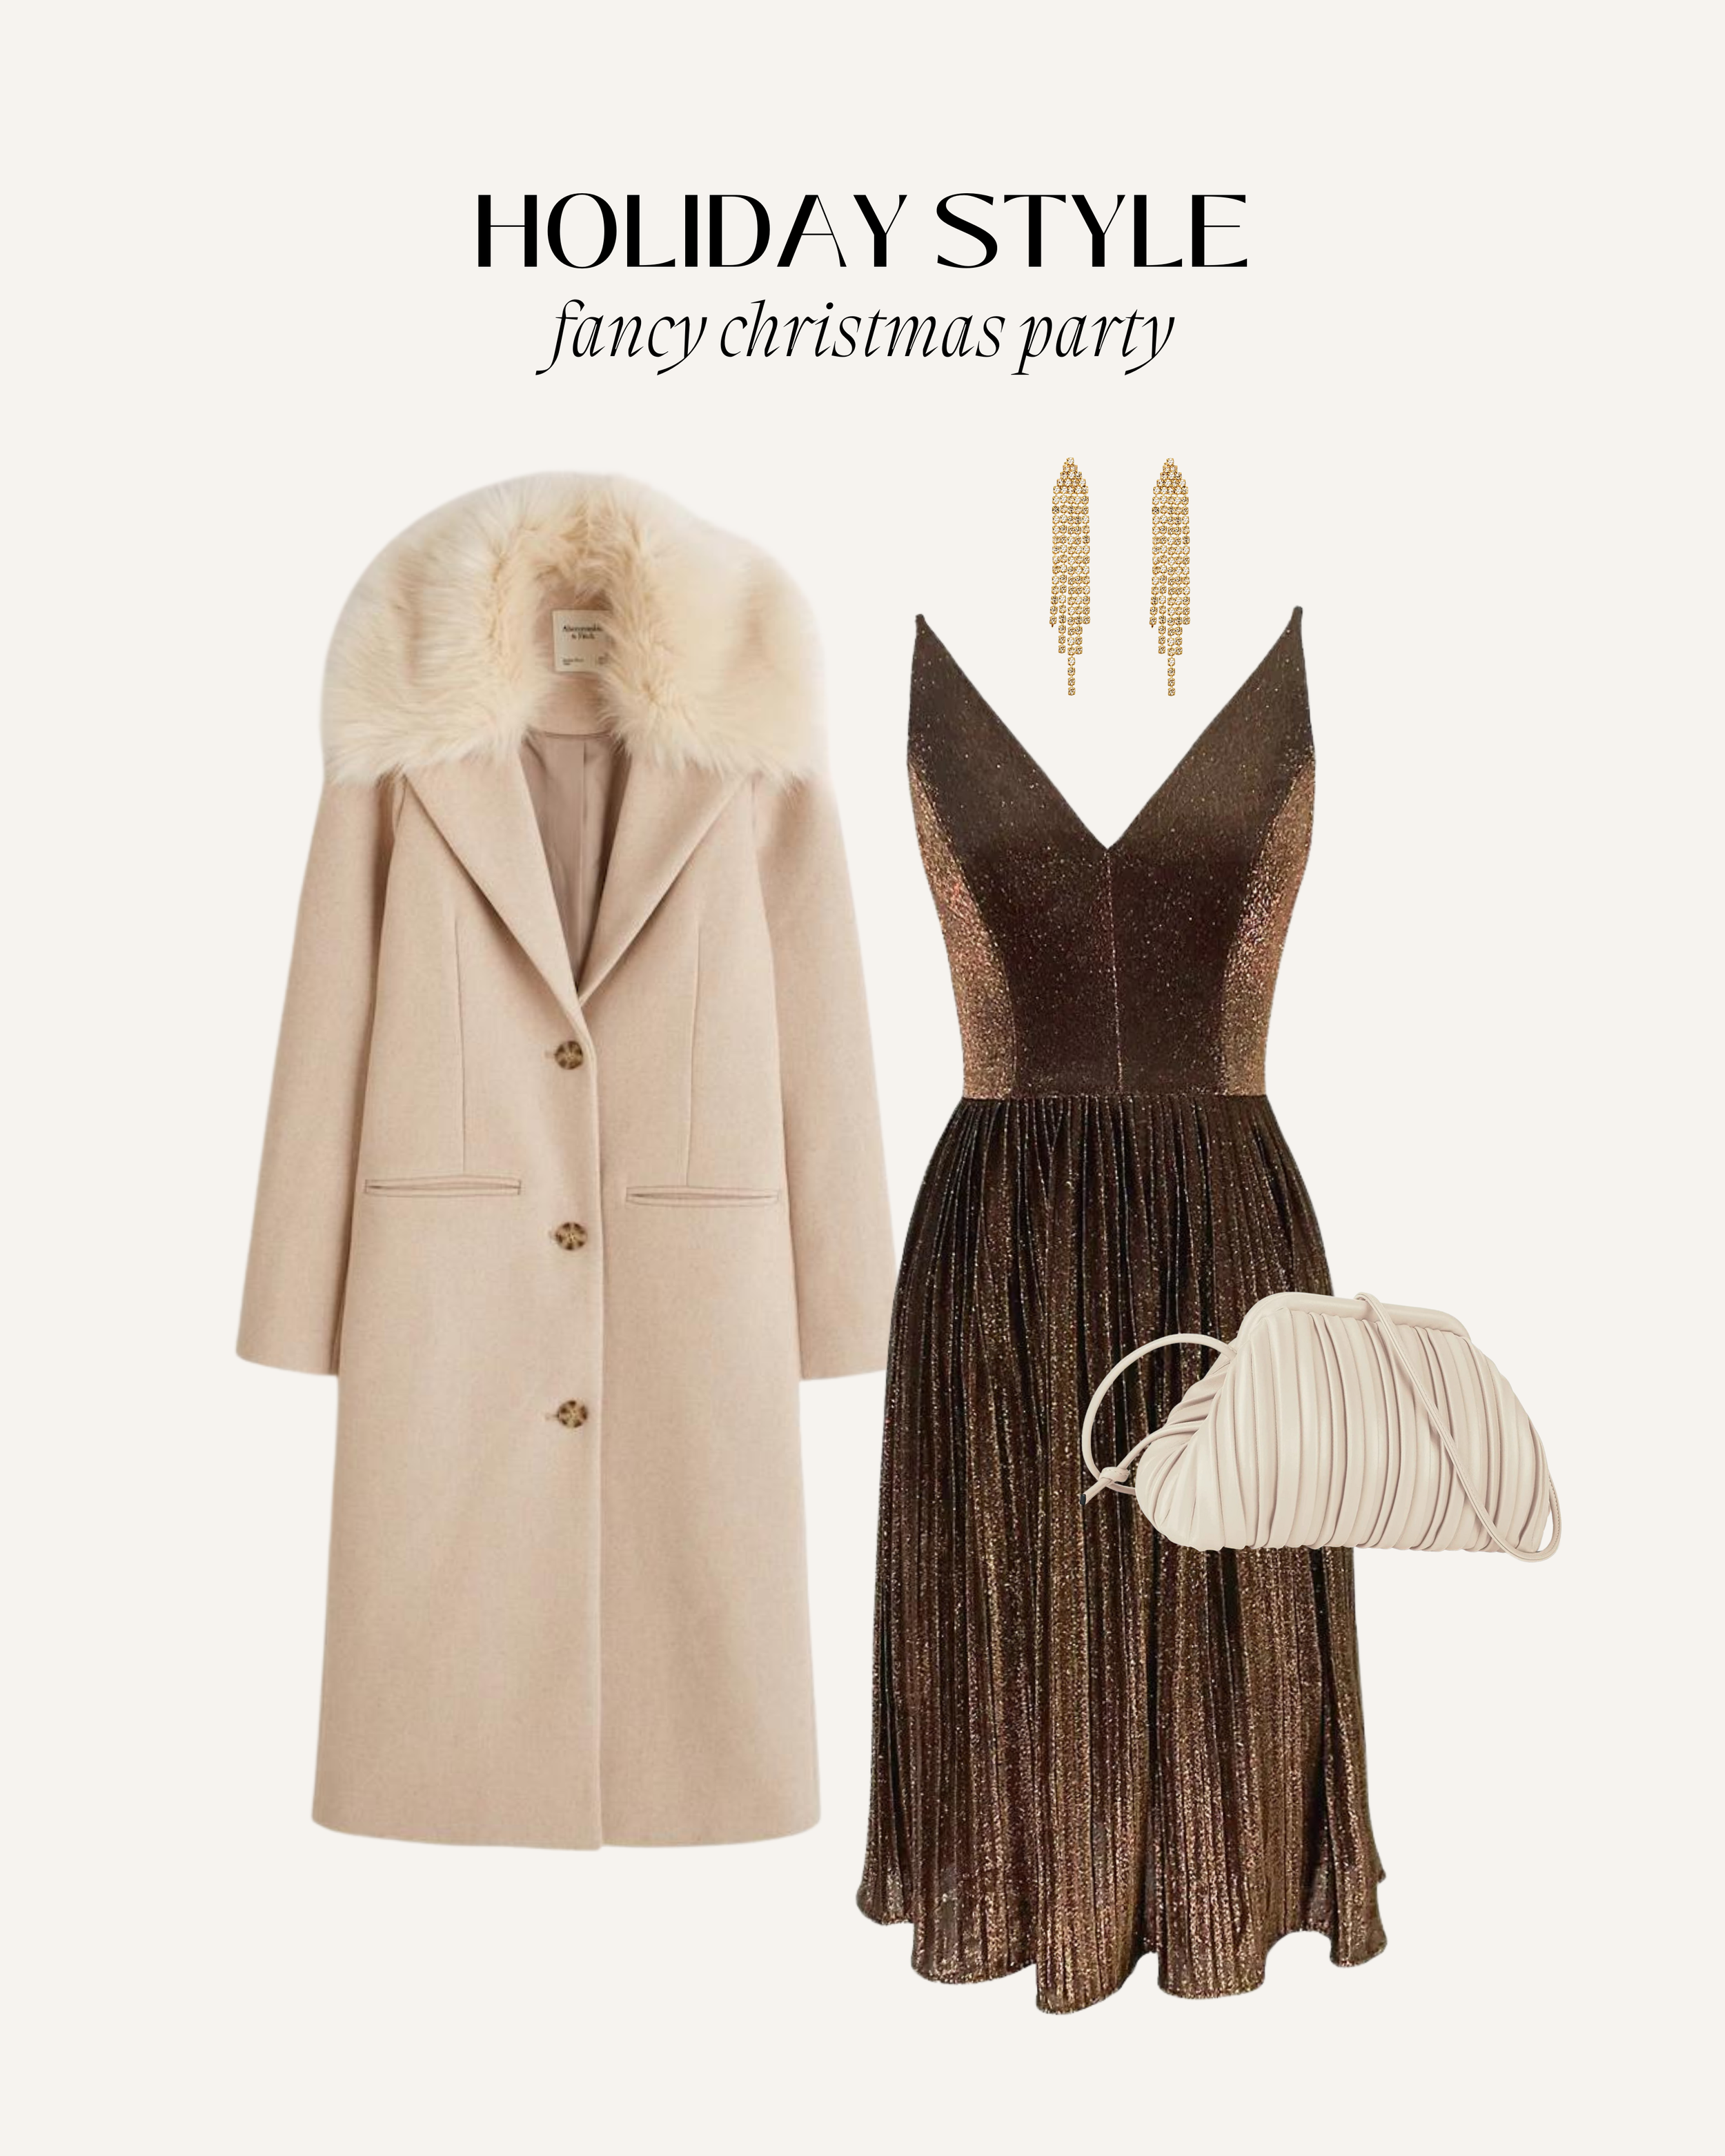 Holiday Style Inspiration - Bre Sheppard - Fancy Christmas Party.png